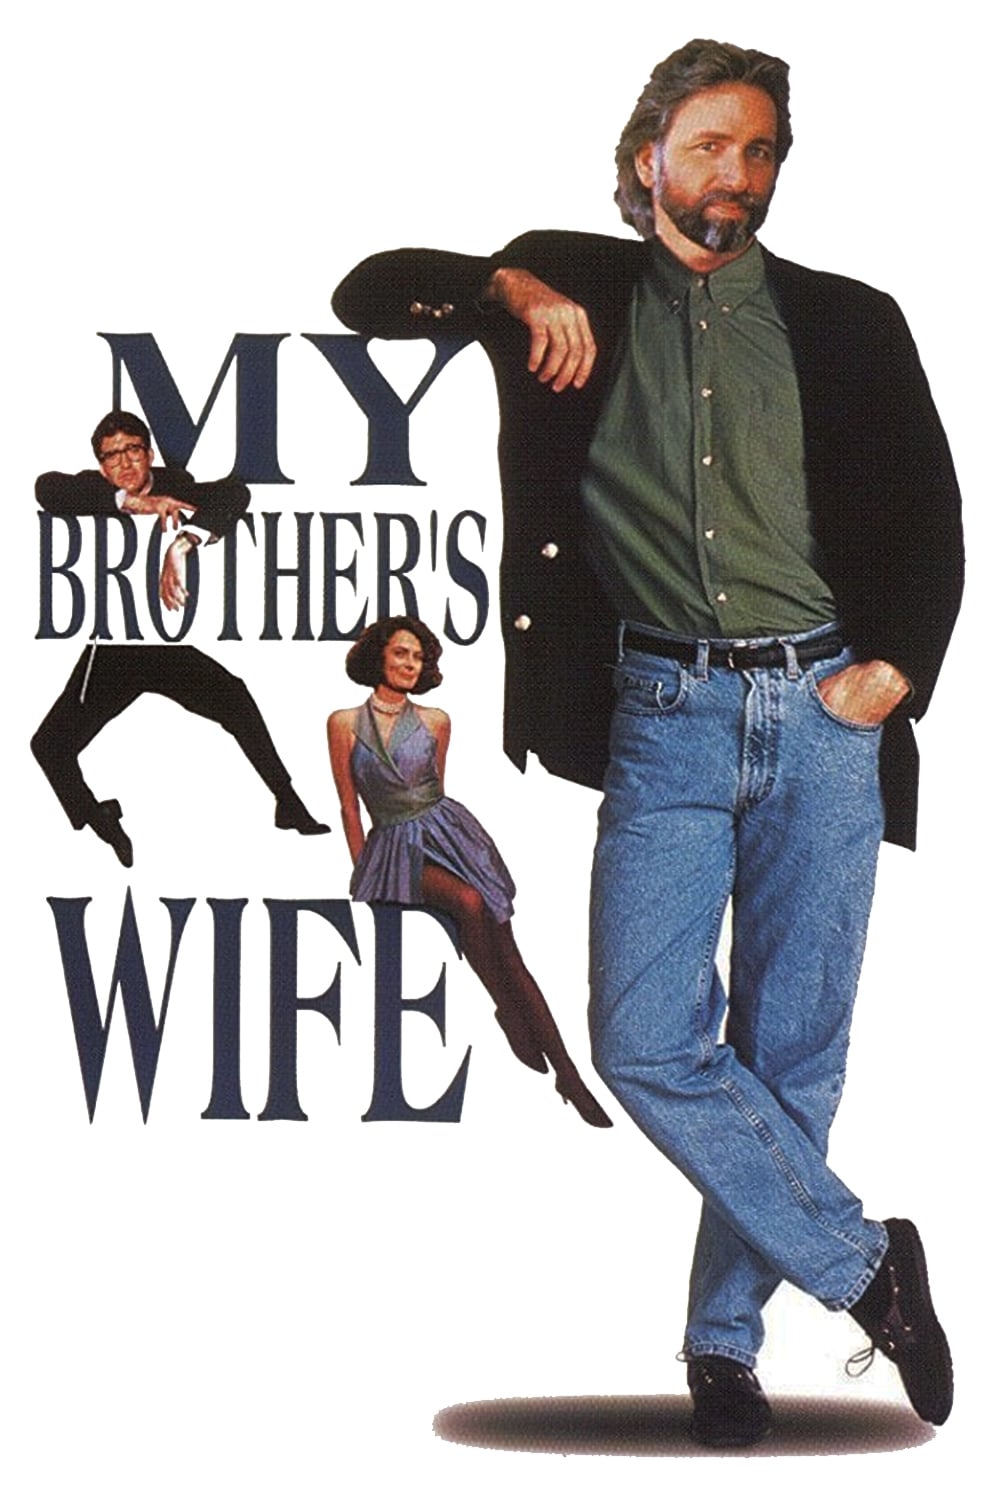 My Brother's Wife (1989)